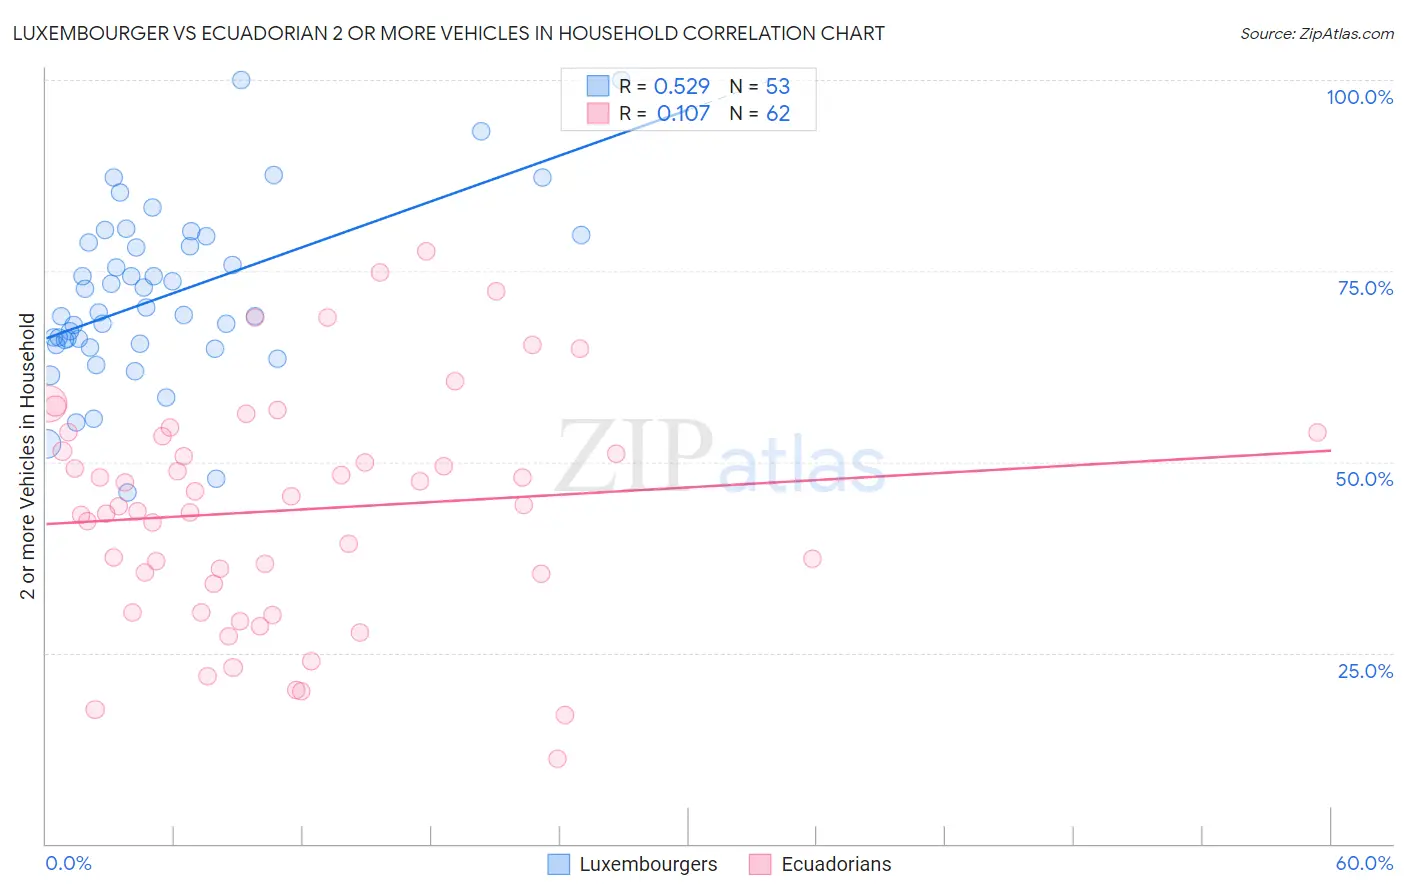 Luxembourger vs Ecuadorian 2 or more Vehicles in Household